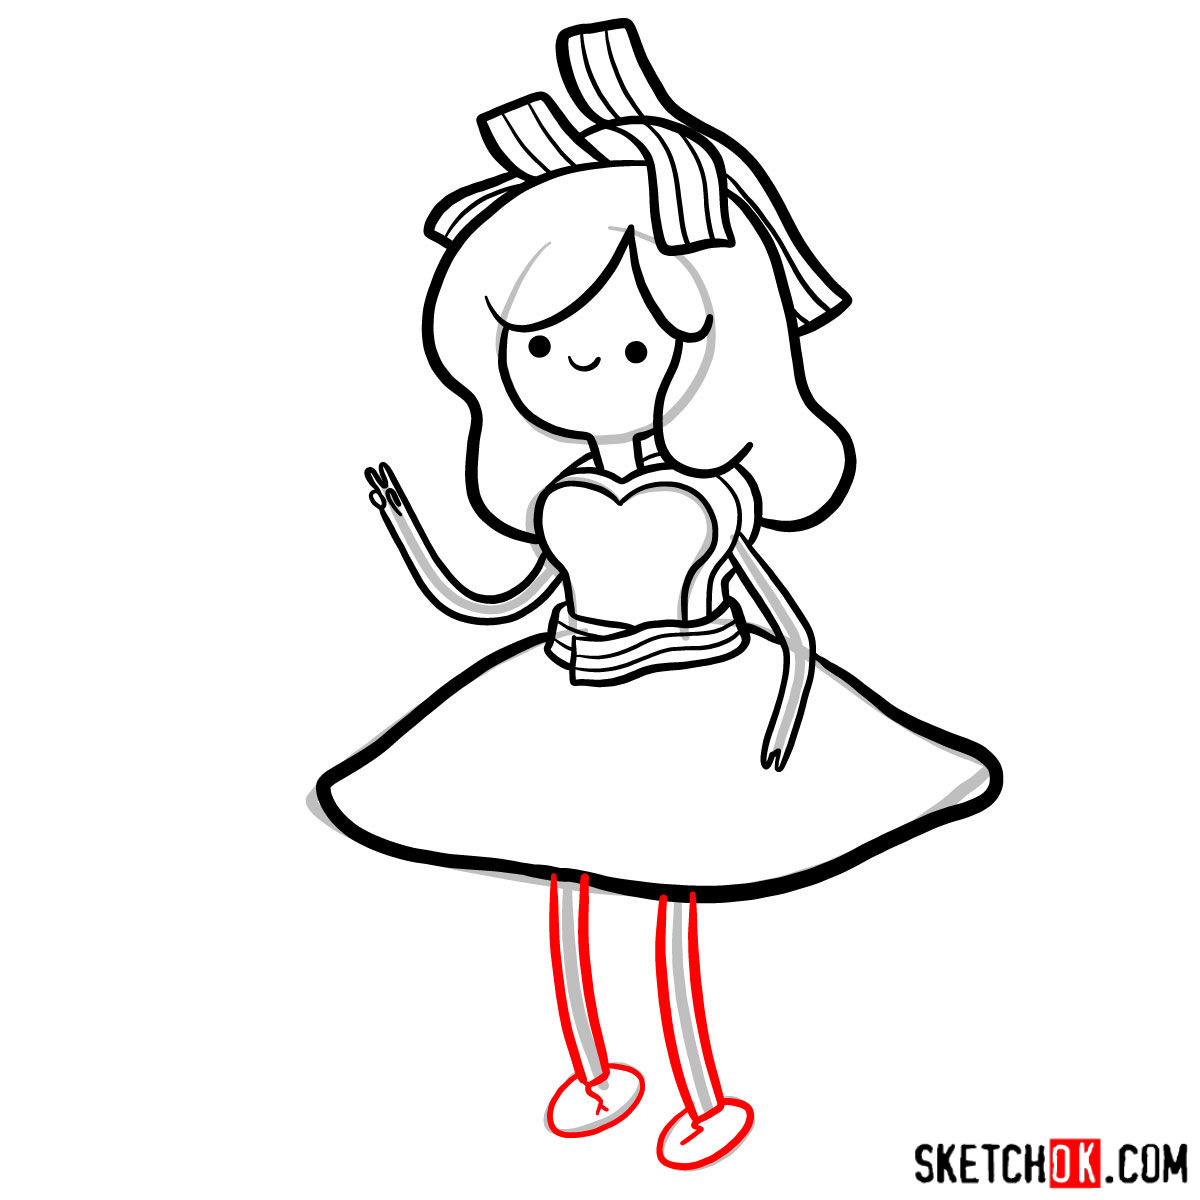 How to draw Breakfast Princess from Adventure Time - step 11